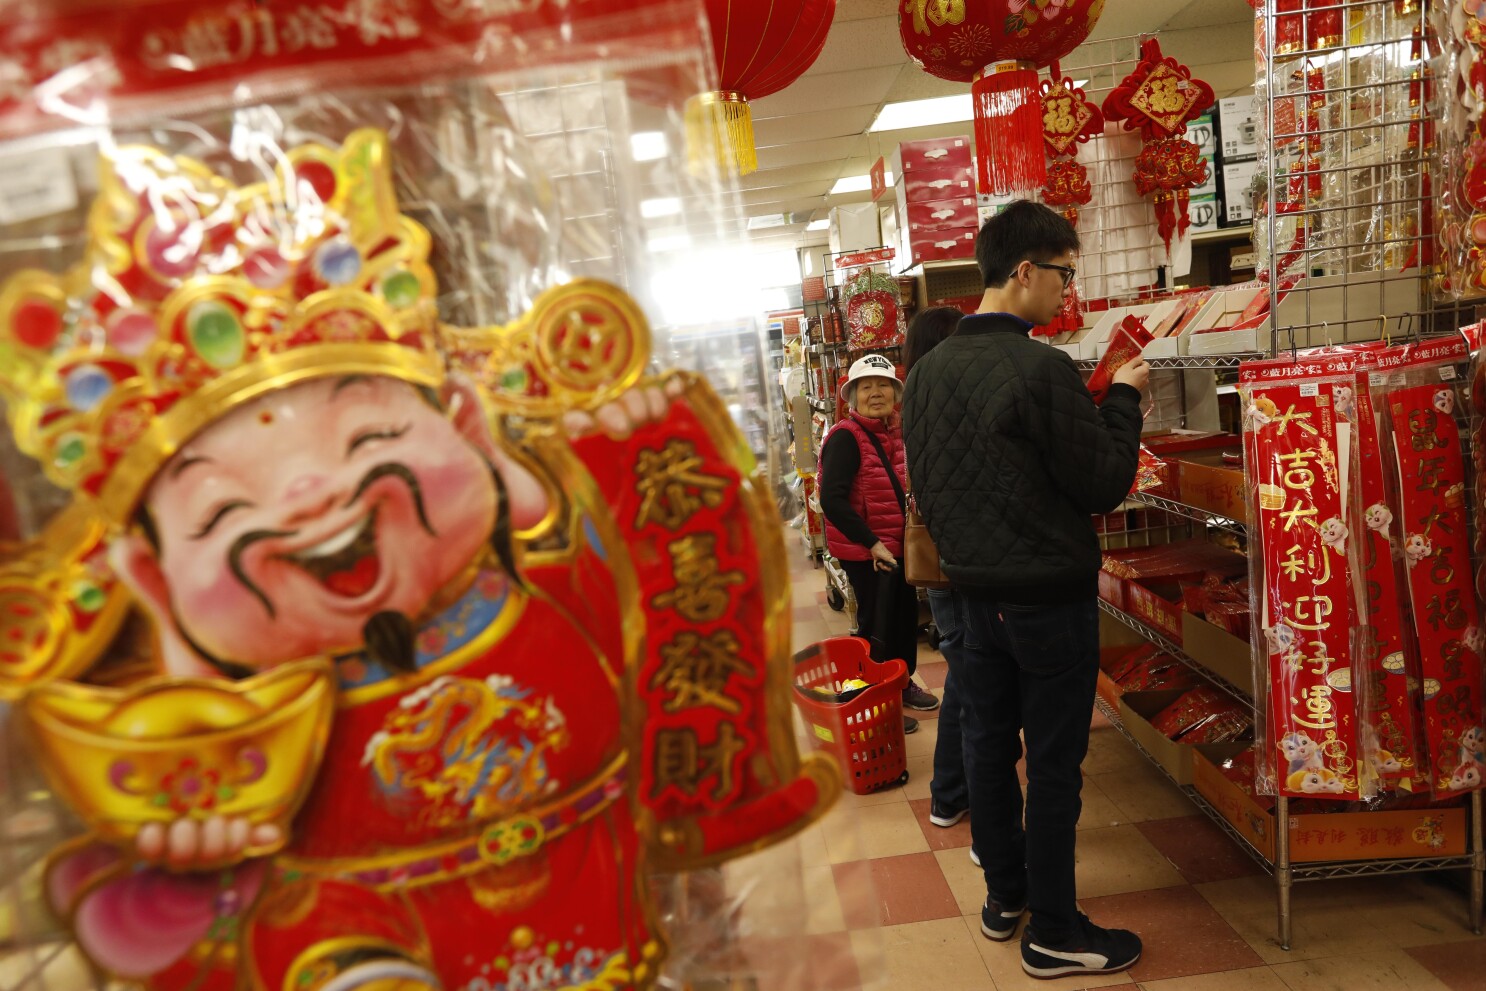 lunar new year red envelopes yield much more than cash los angeles times lunar new year red envelopes yield much